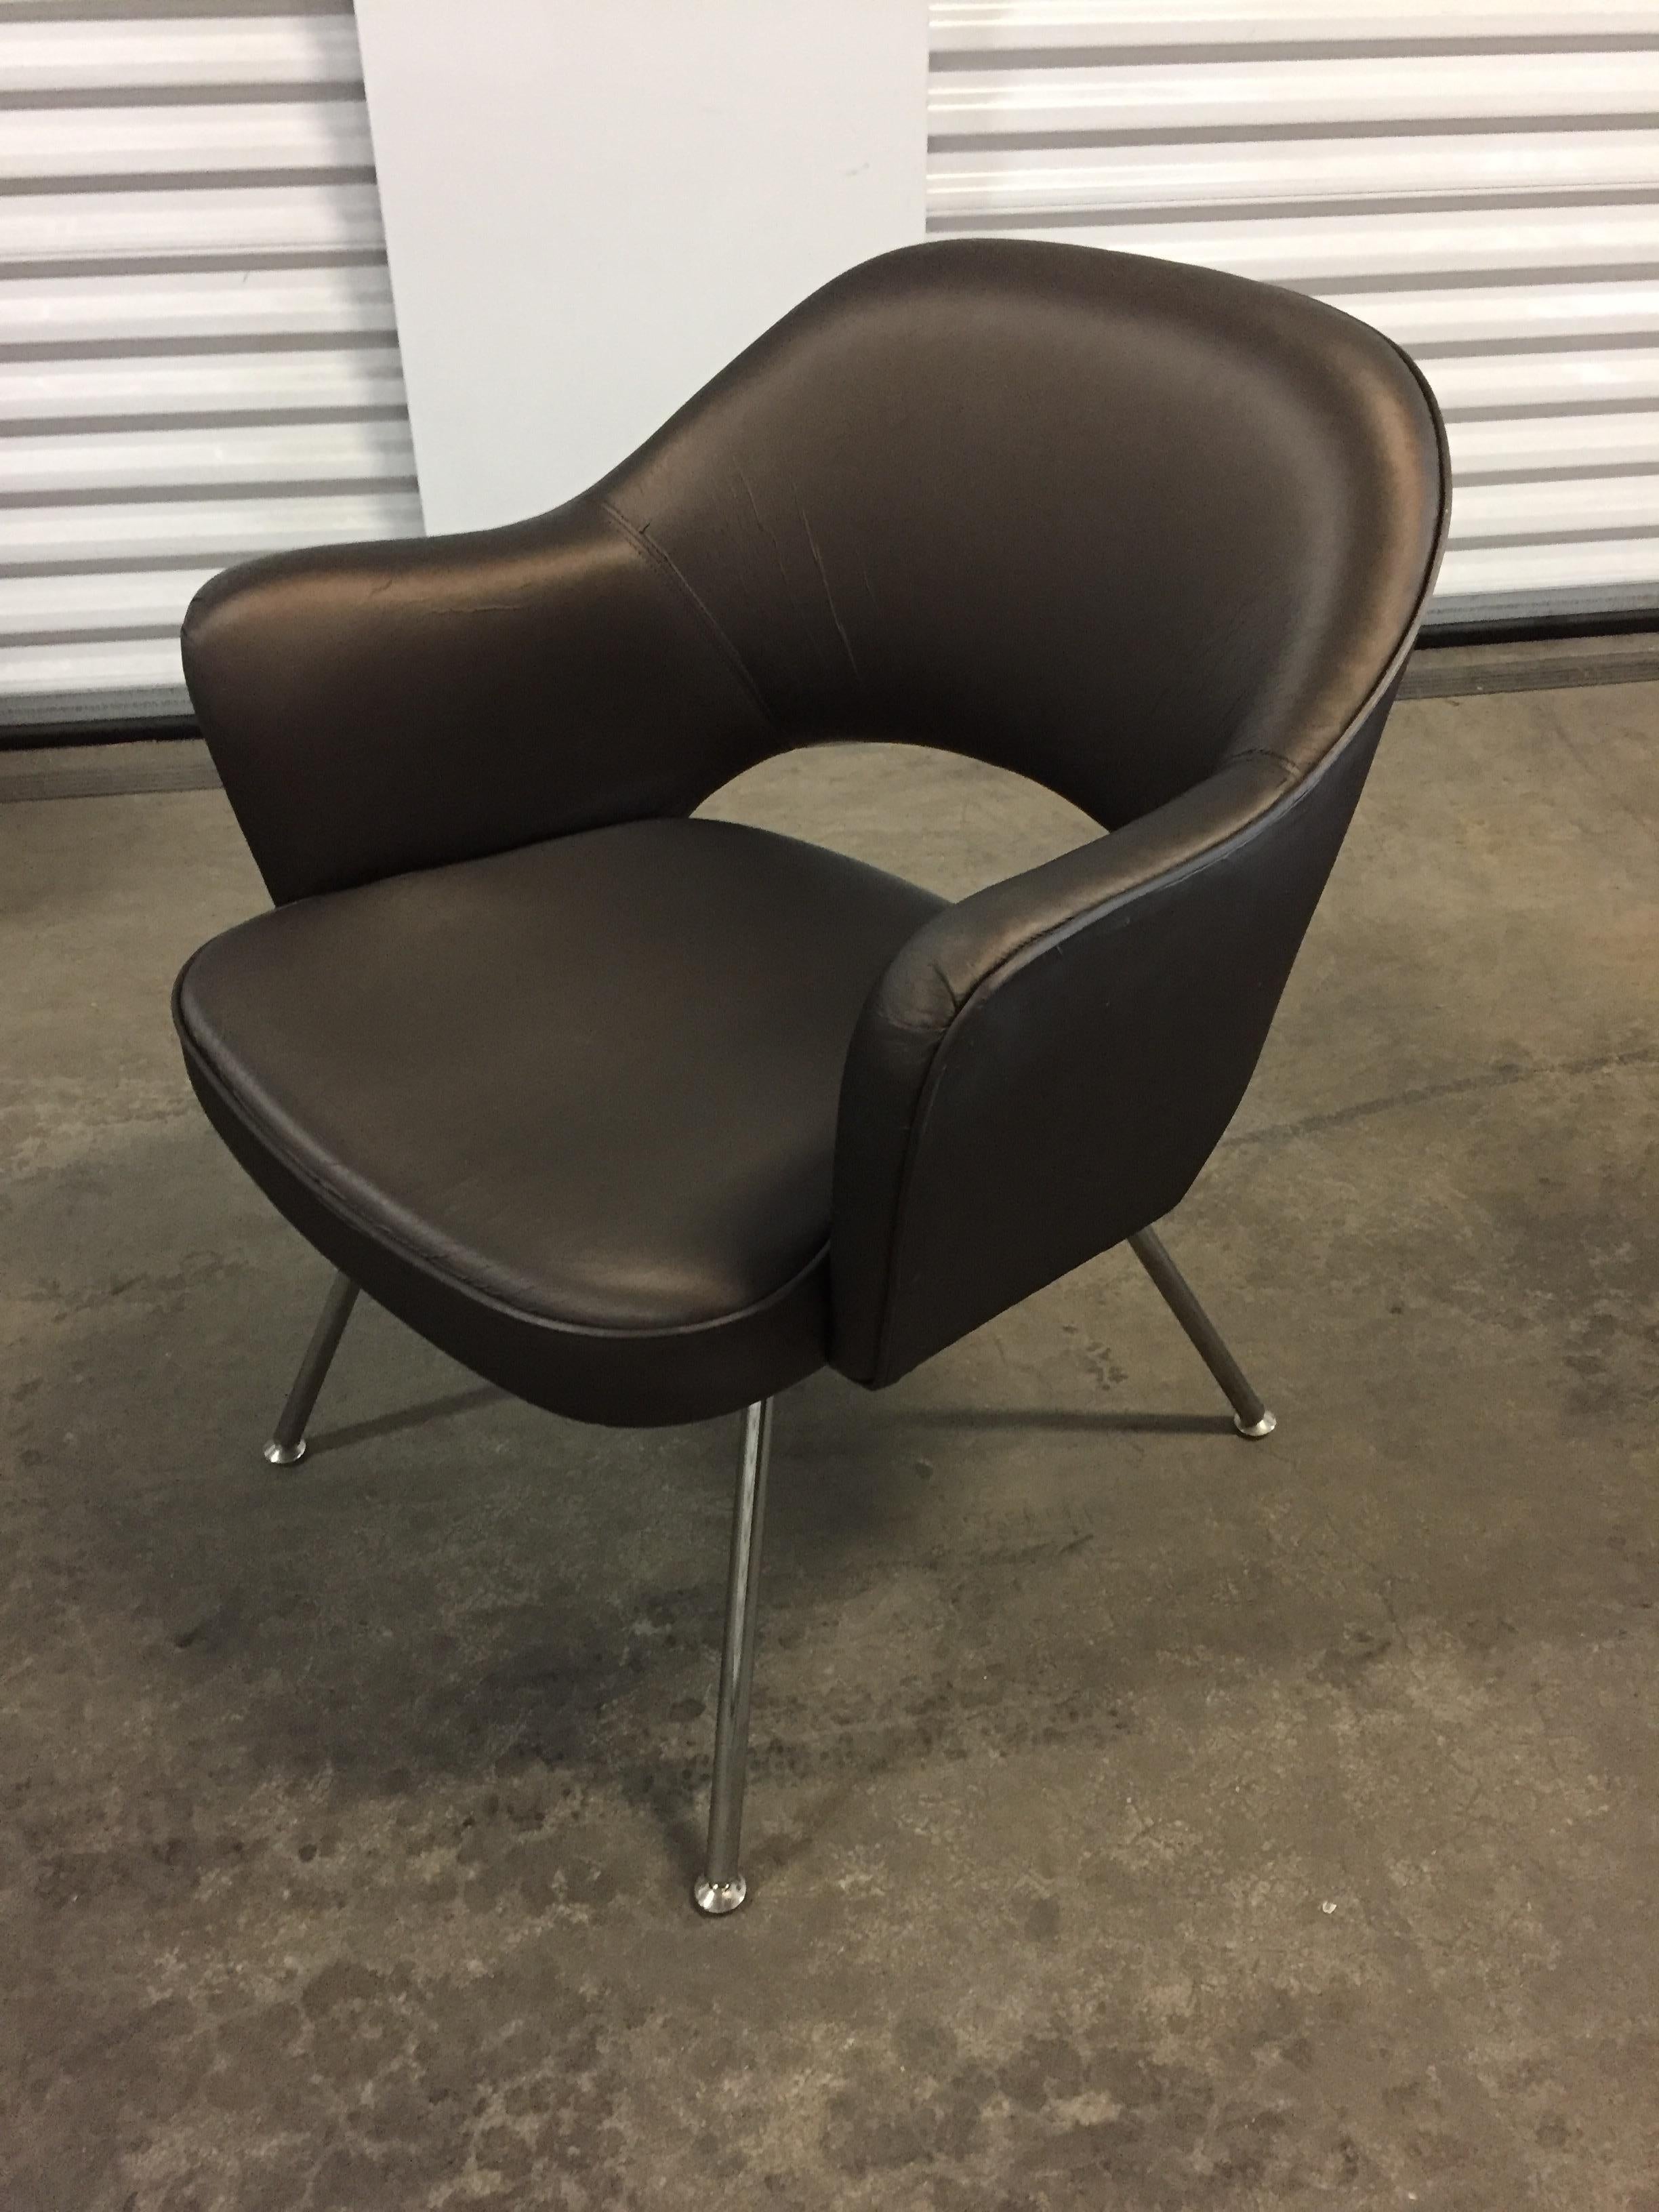 20th Century 1975 Knoll Saarinen Executive Dining or Office Chairs/ Set of 6 For Sale